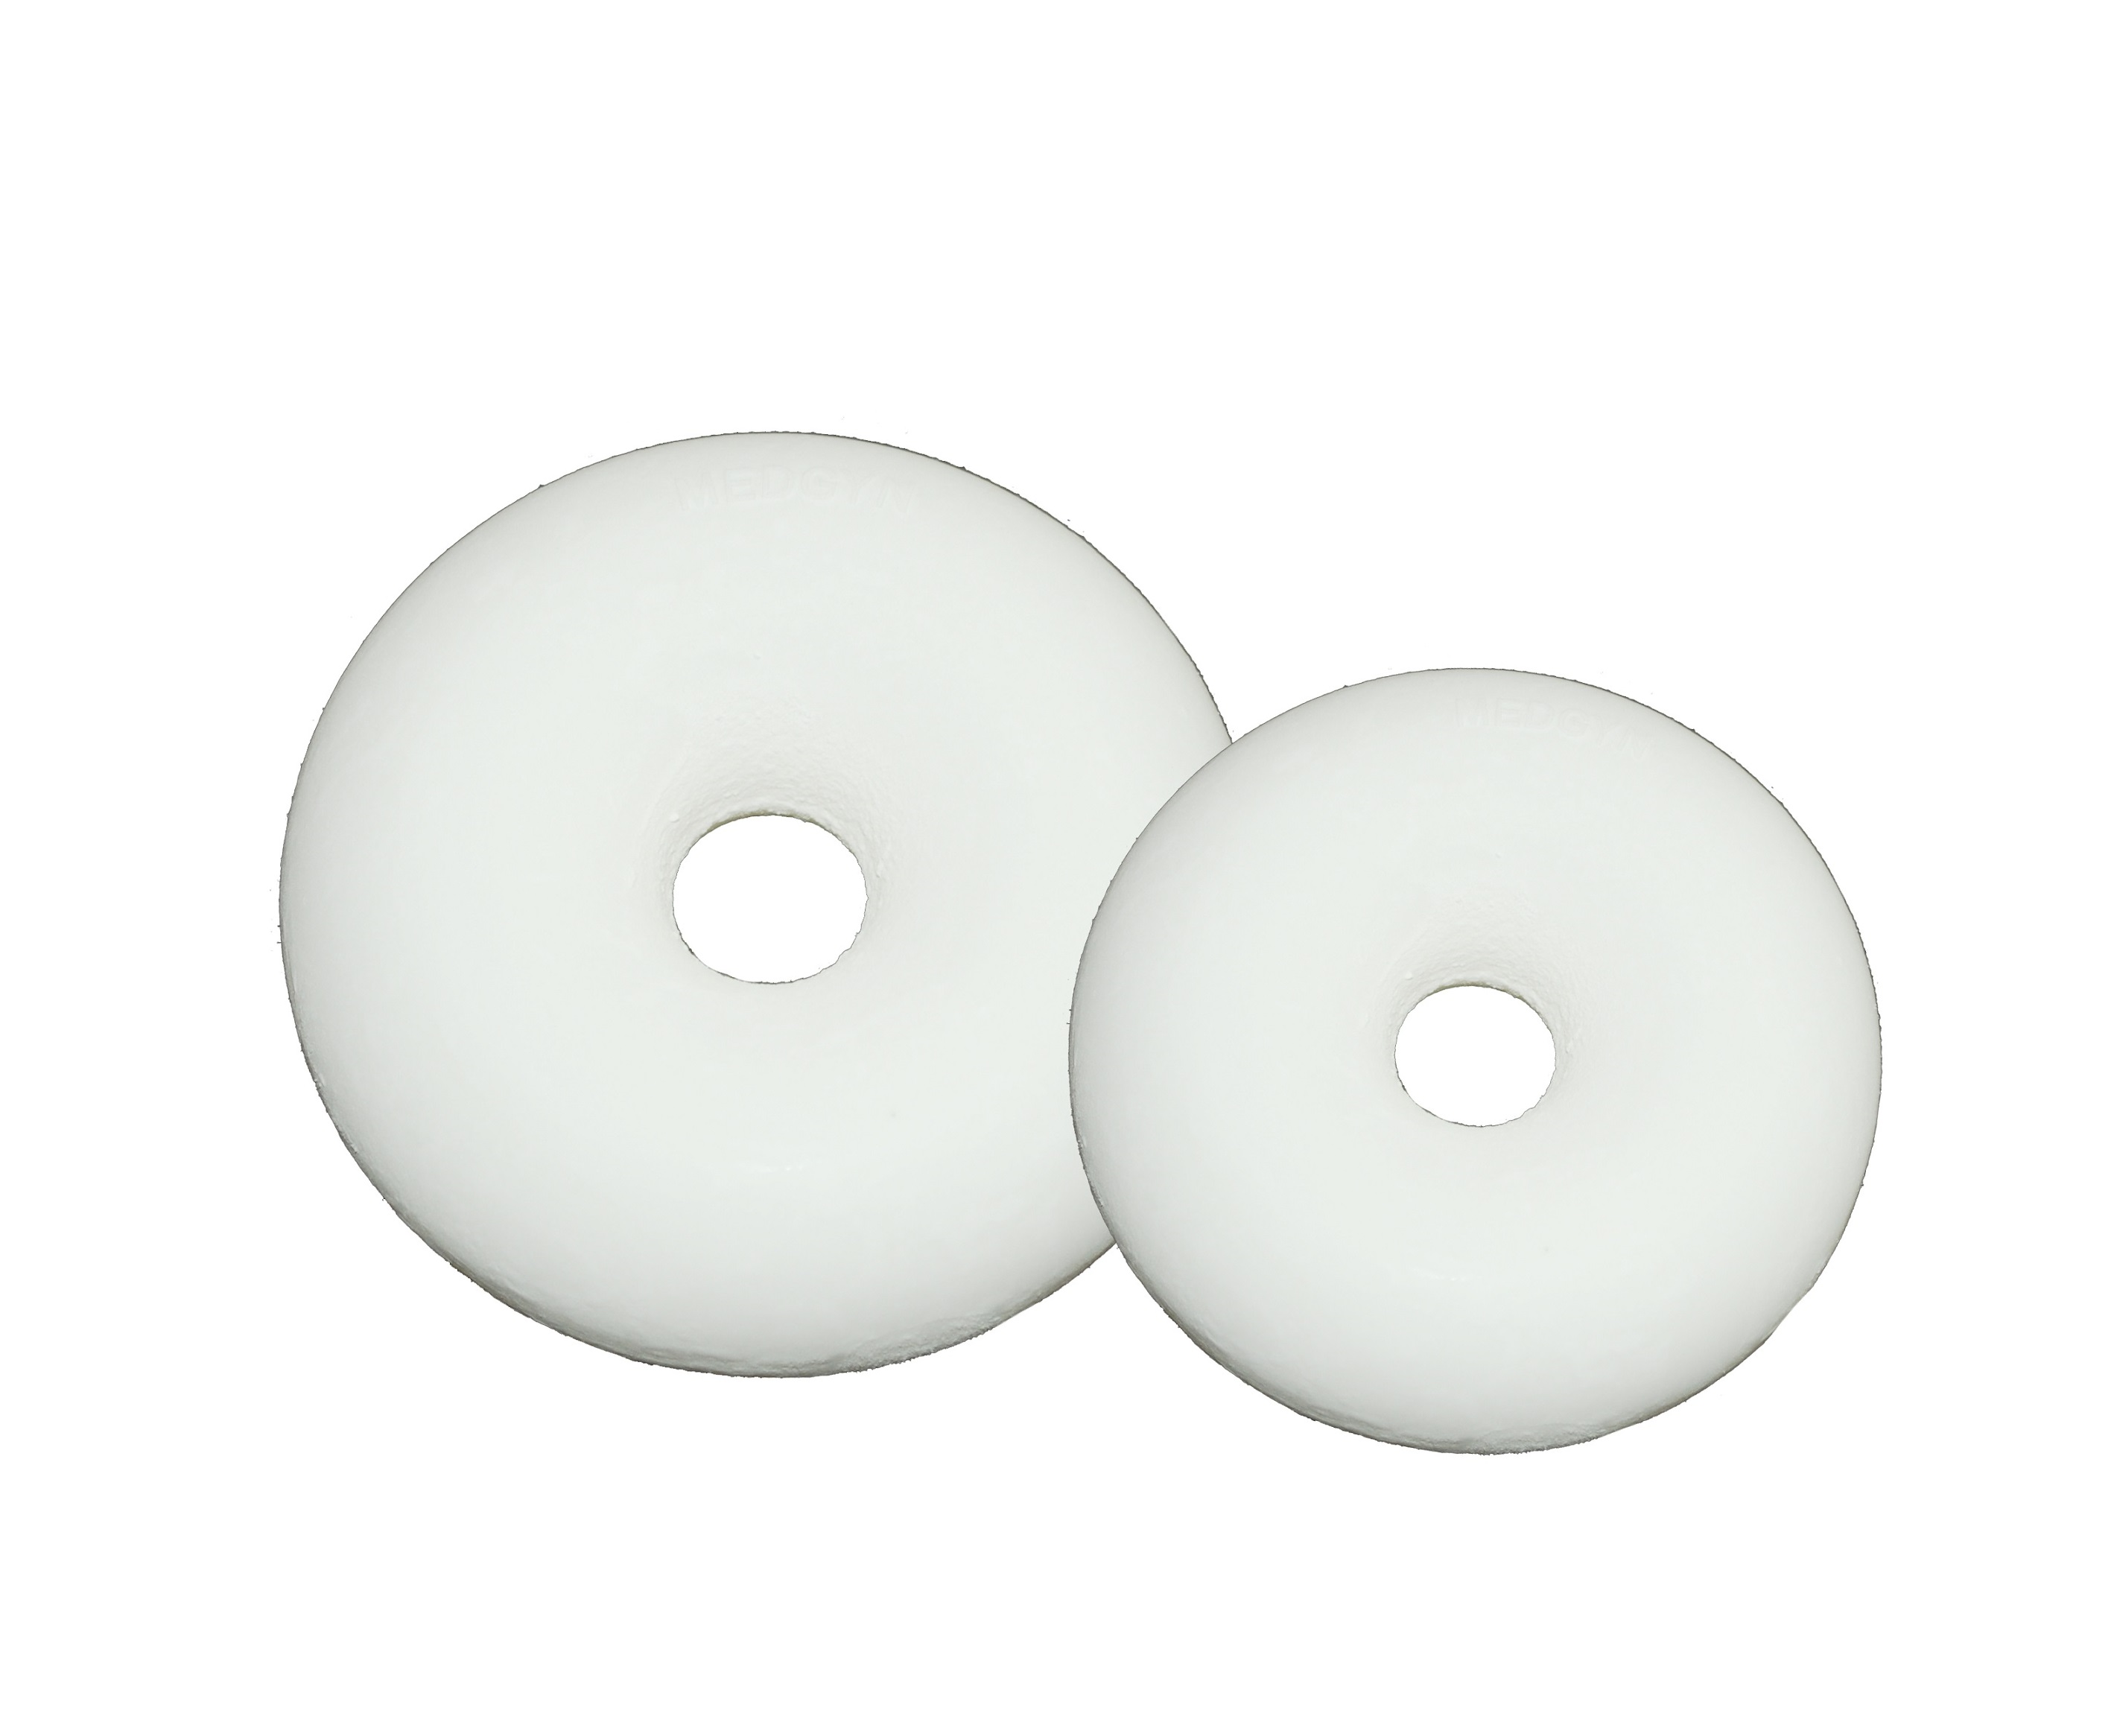 MedGyn Pessary Silicone Donut #5 3.2 inches or 82 mm